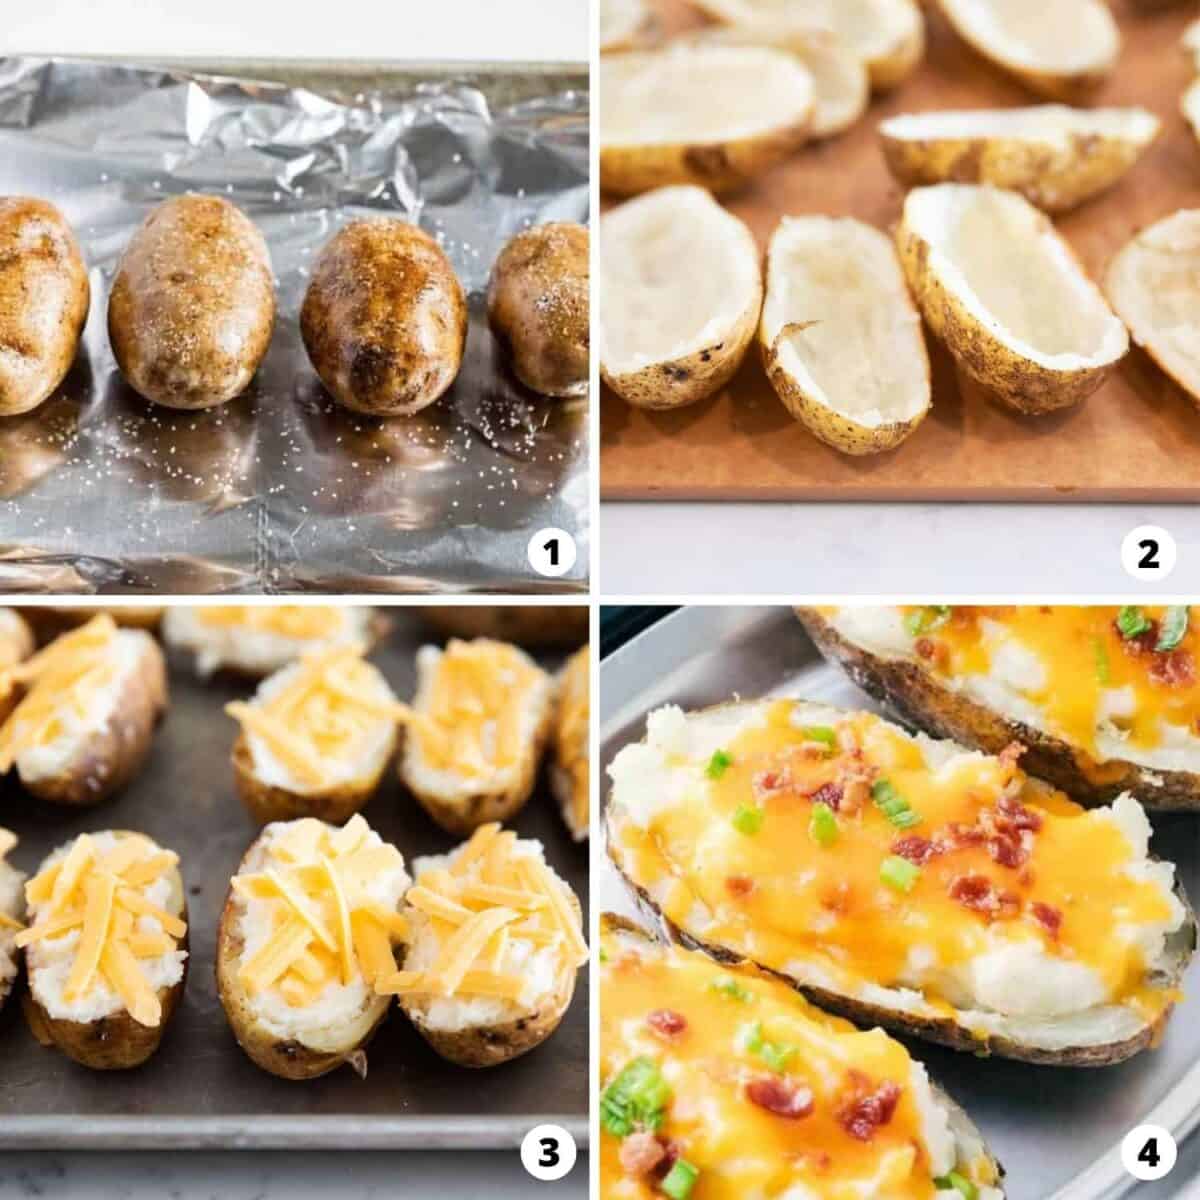 Showing how to make twice baked potatoes in a 4 step collage.